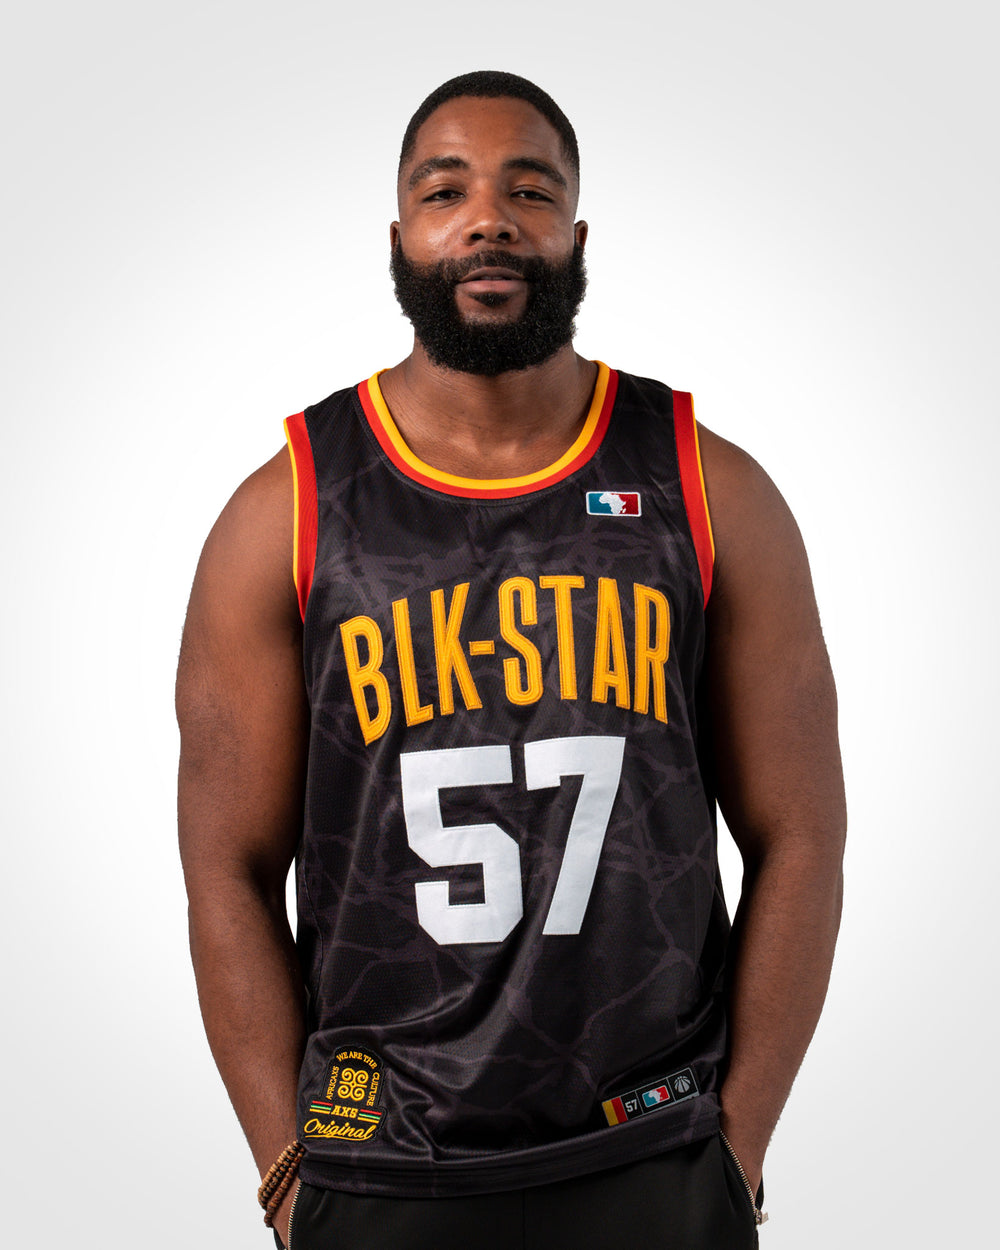 Made in Africa - Black Star Jersey (Limited) – AFRICAX5